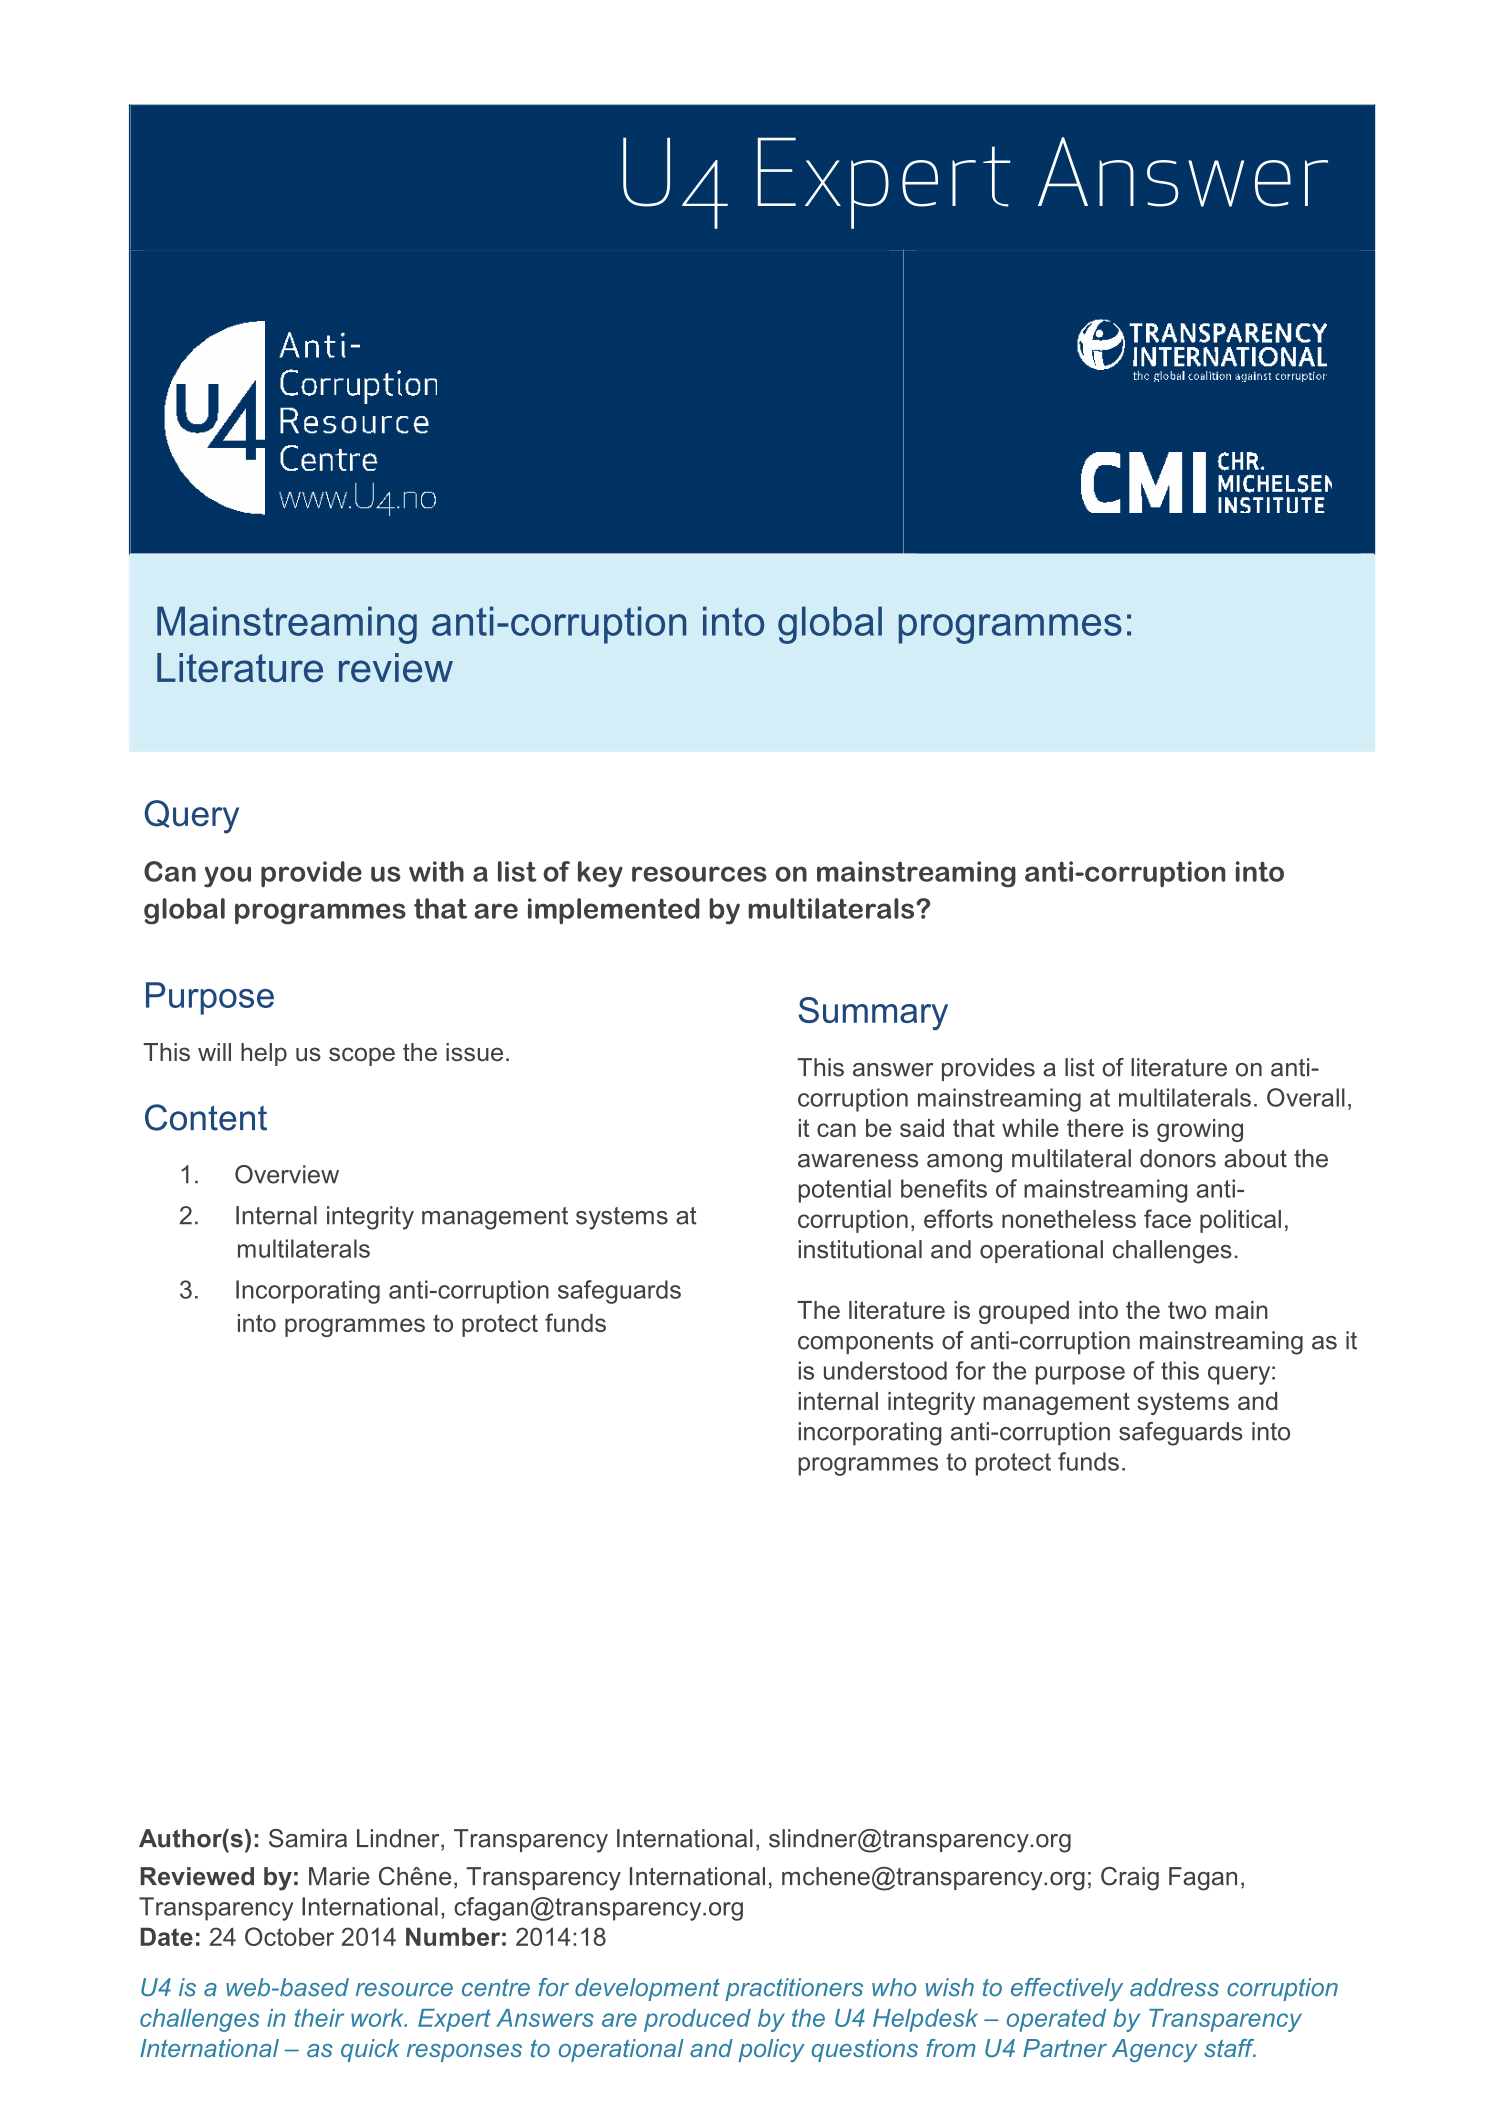 Mainstreaming anti-corruption into global programmes: Literature review